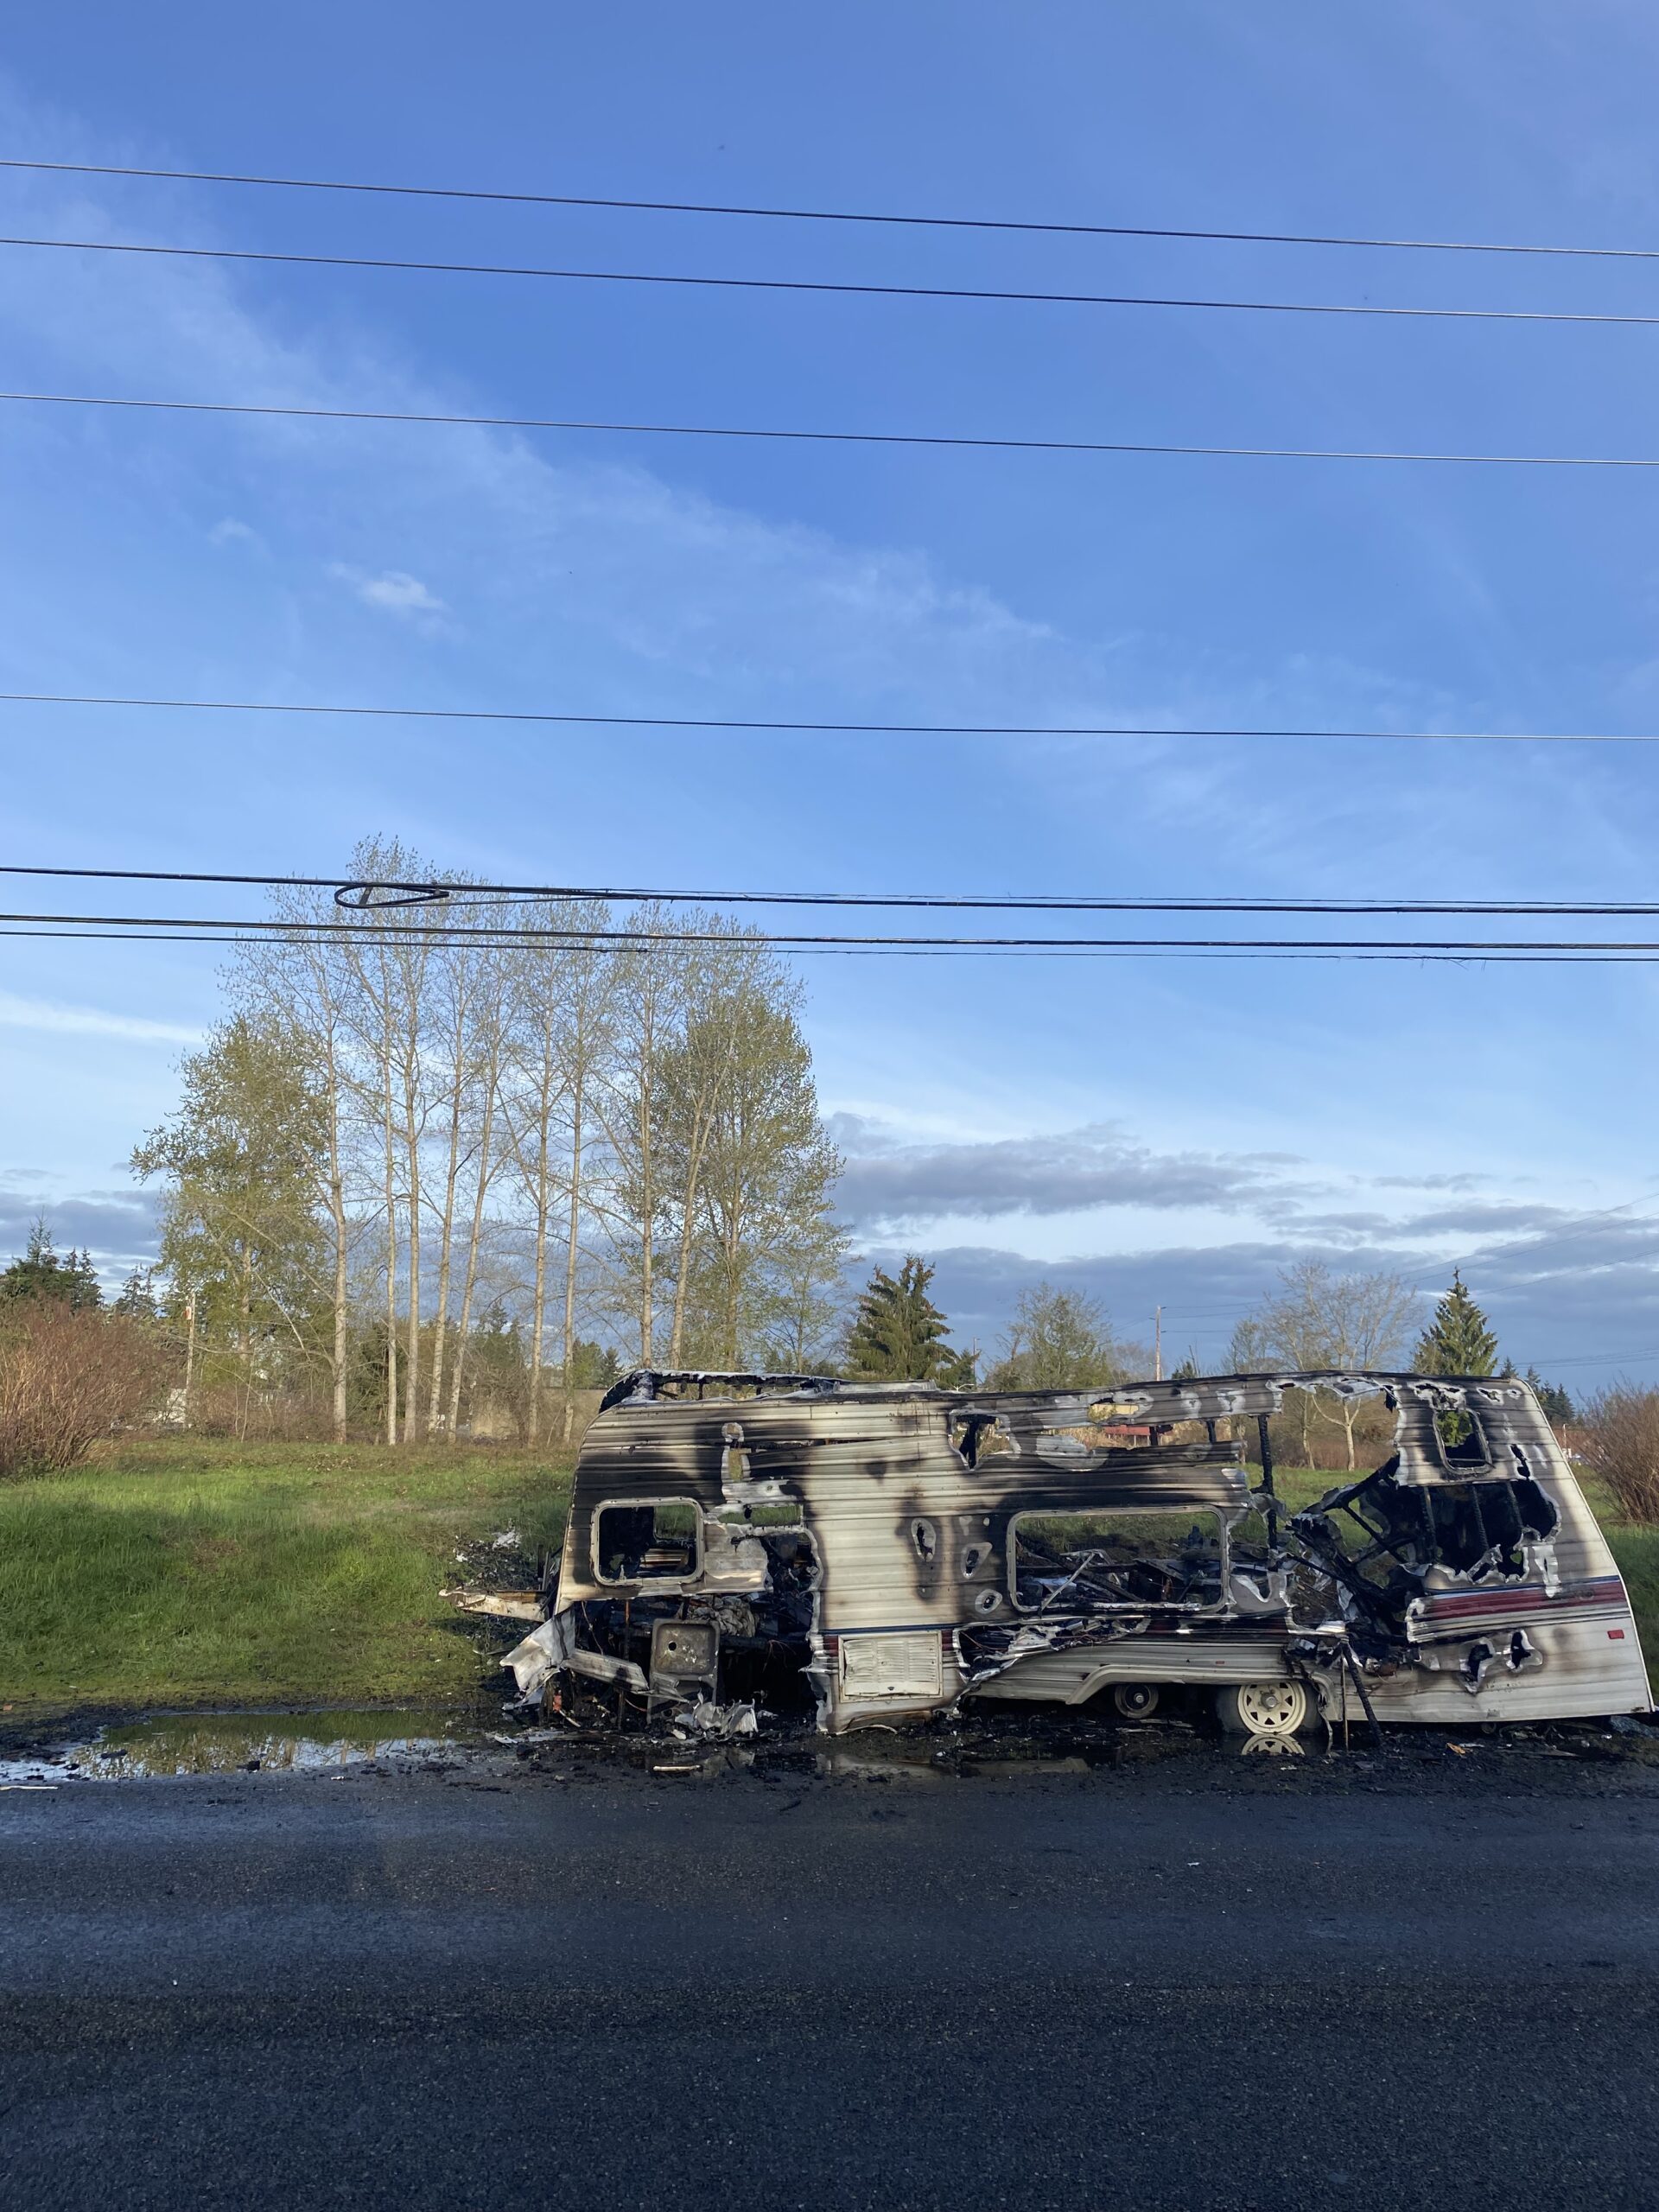 A burned camper trailer on the side of a road.